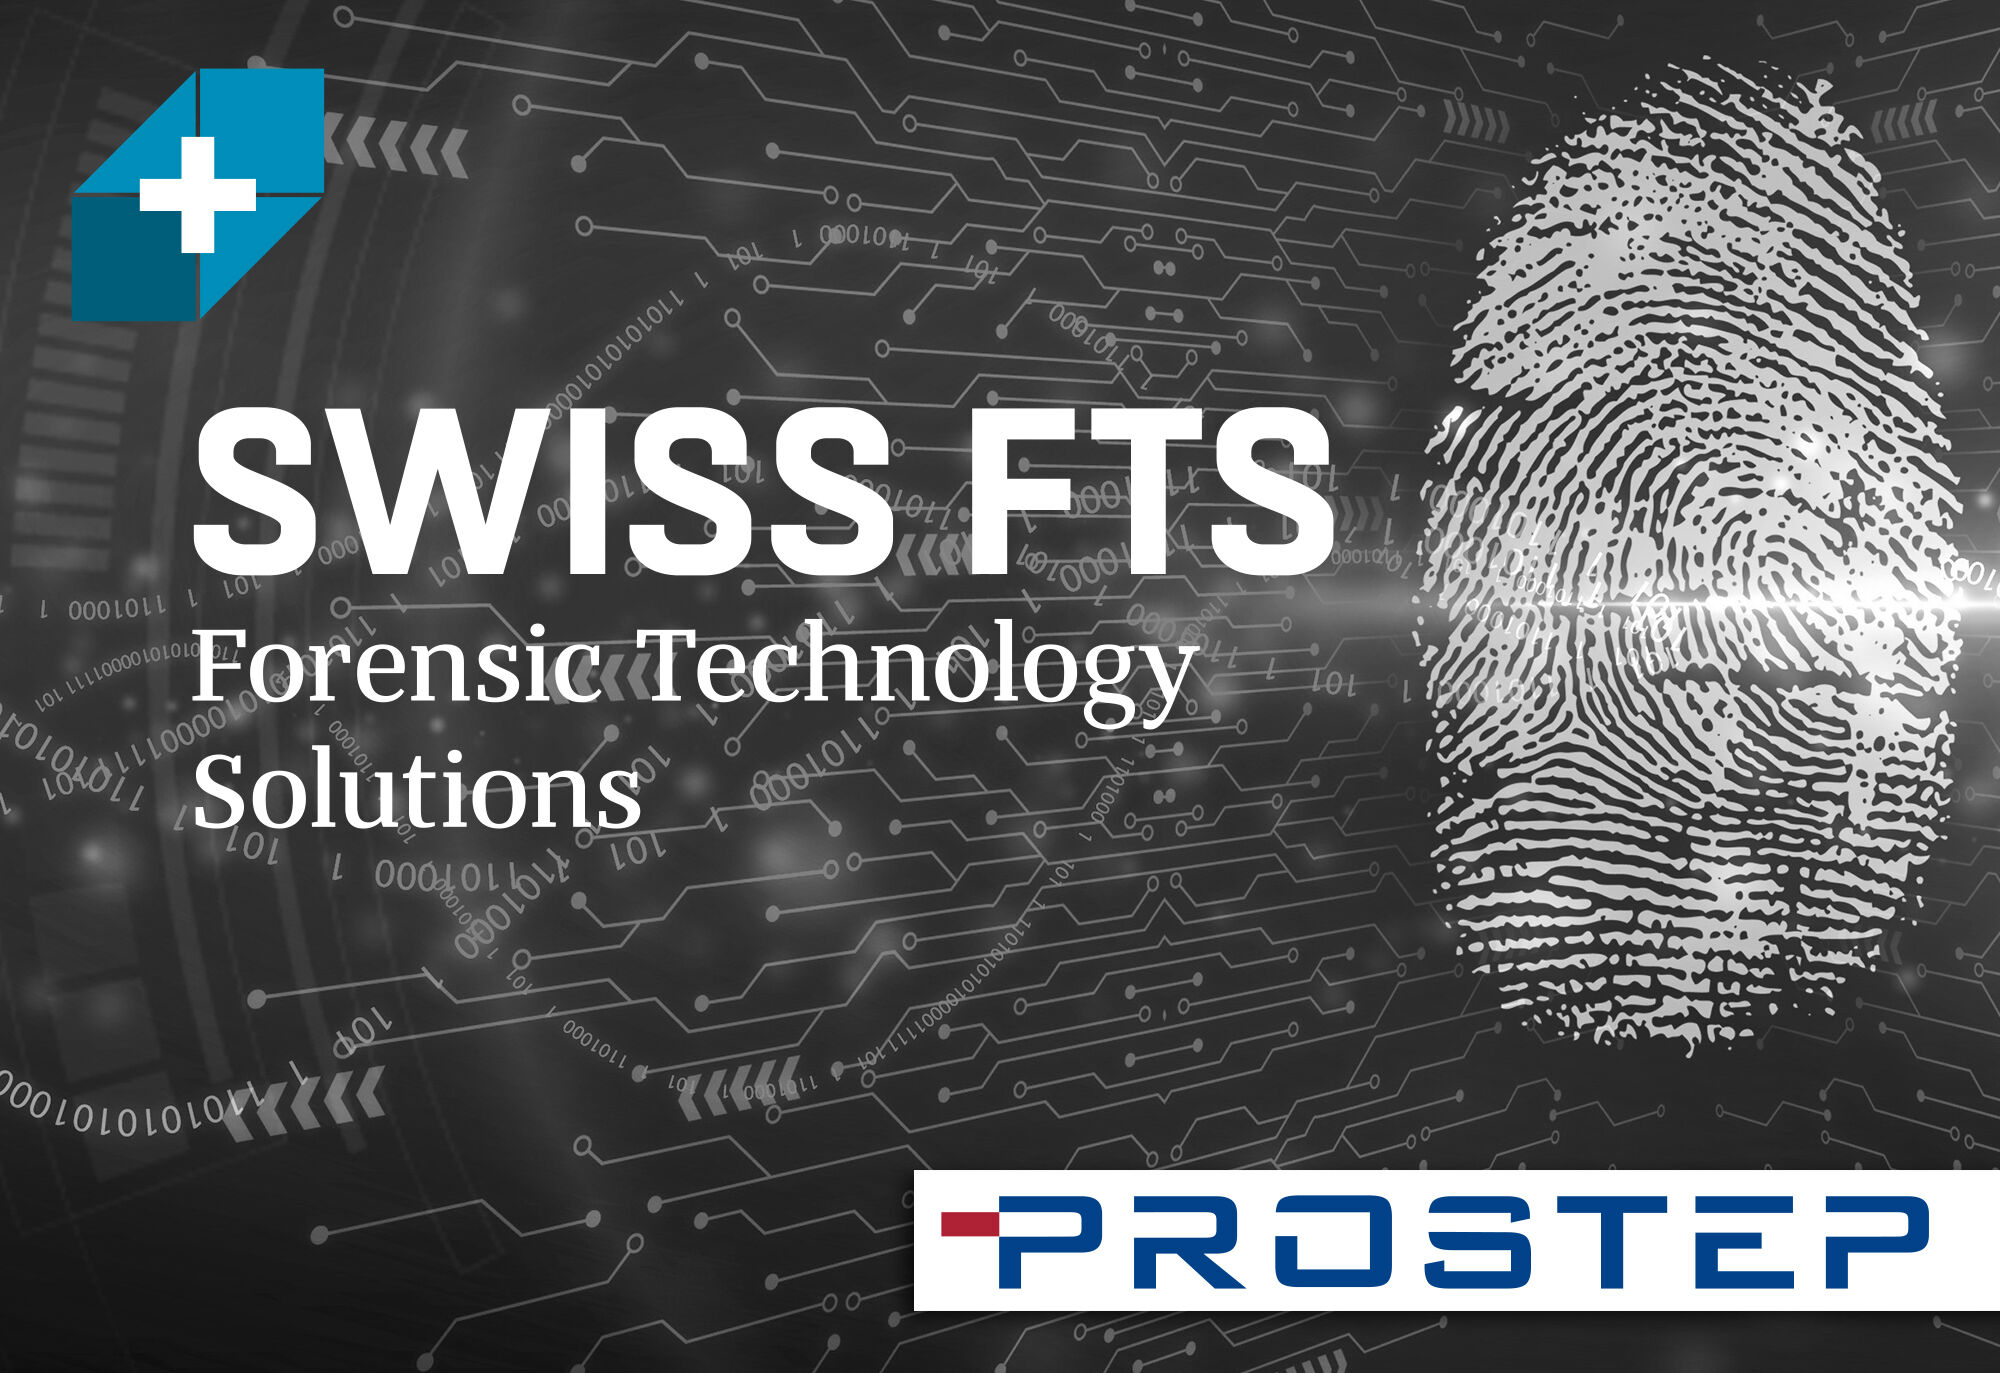 Swiss FTS uses OpenDXM GlobalX for Secure Data Exchange